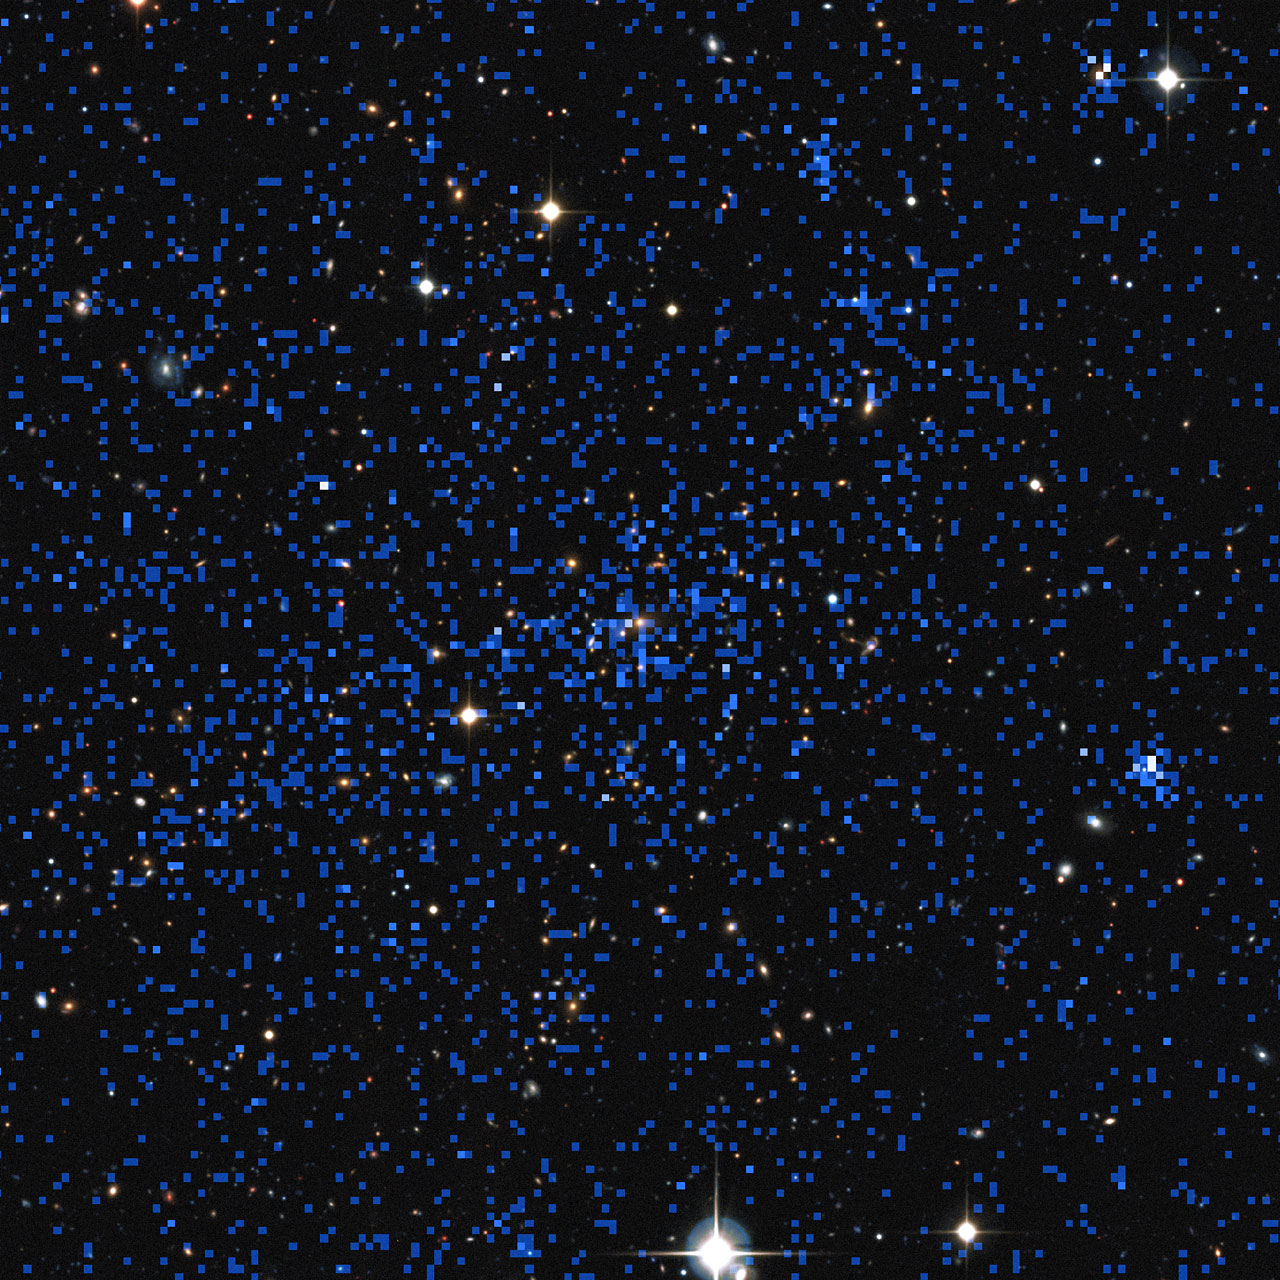 Composite of X-ray and visible light views of a distant cluster